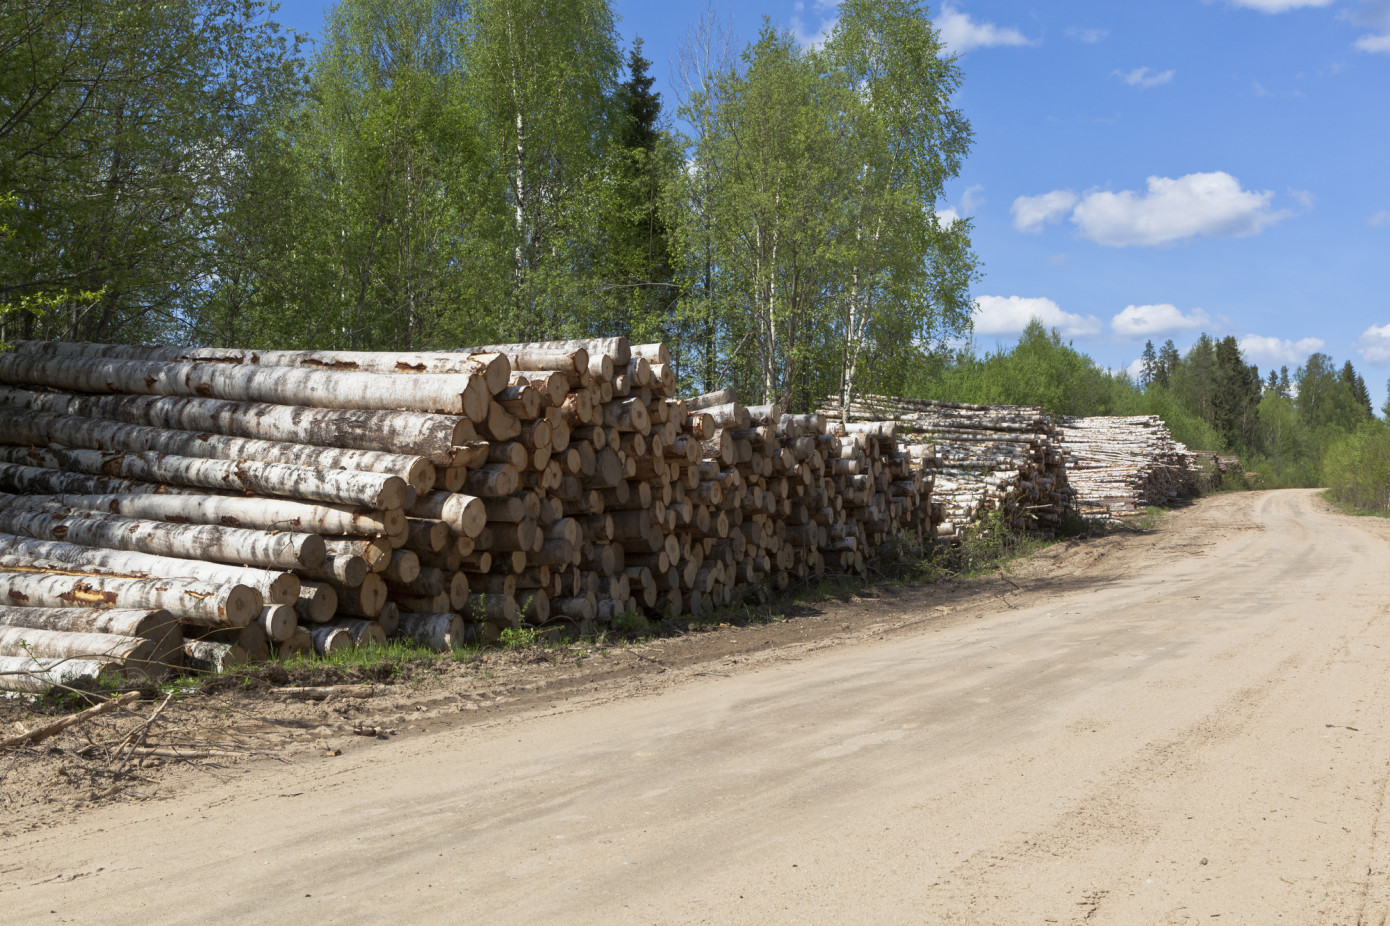 In Jan-May, Russia reduces log exports by 3 million m3